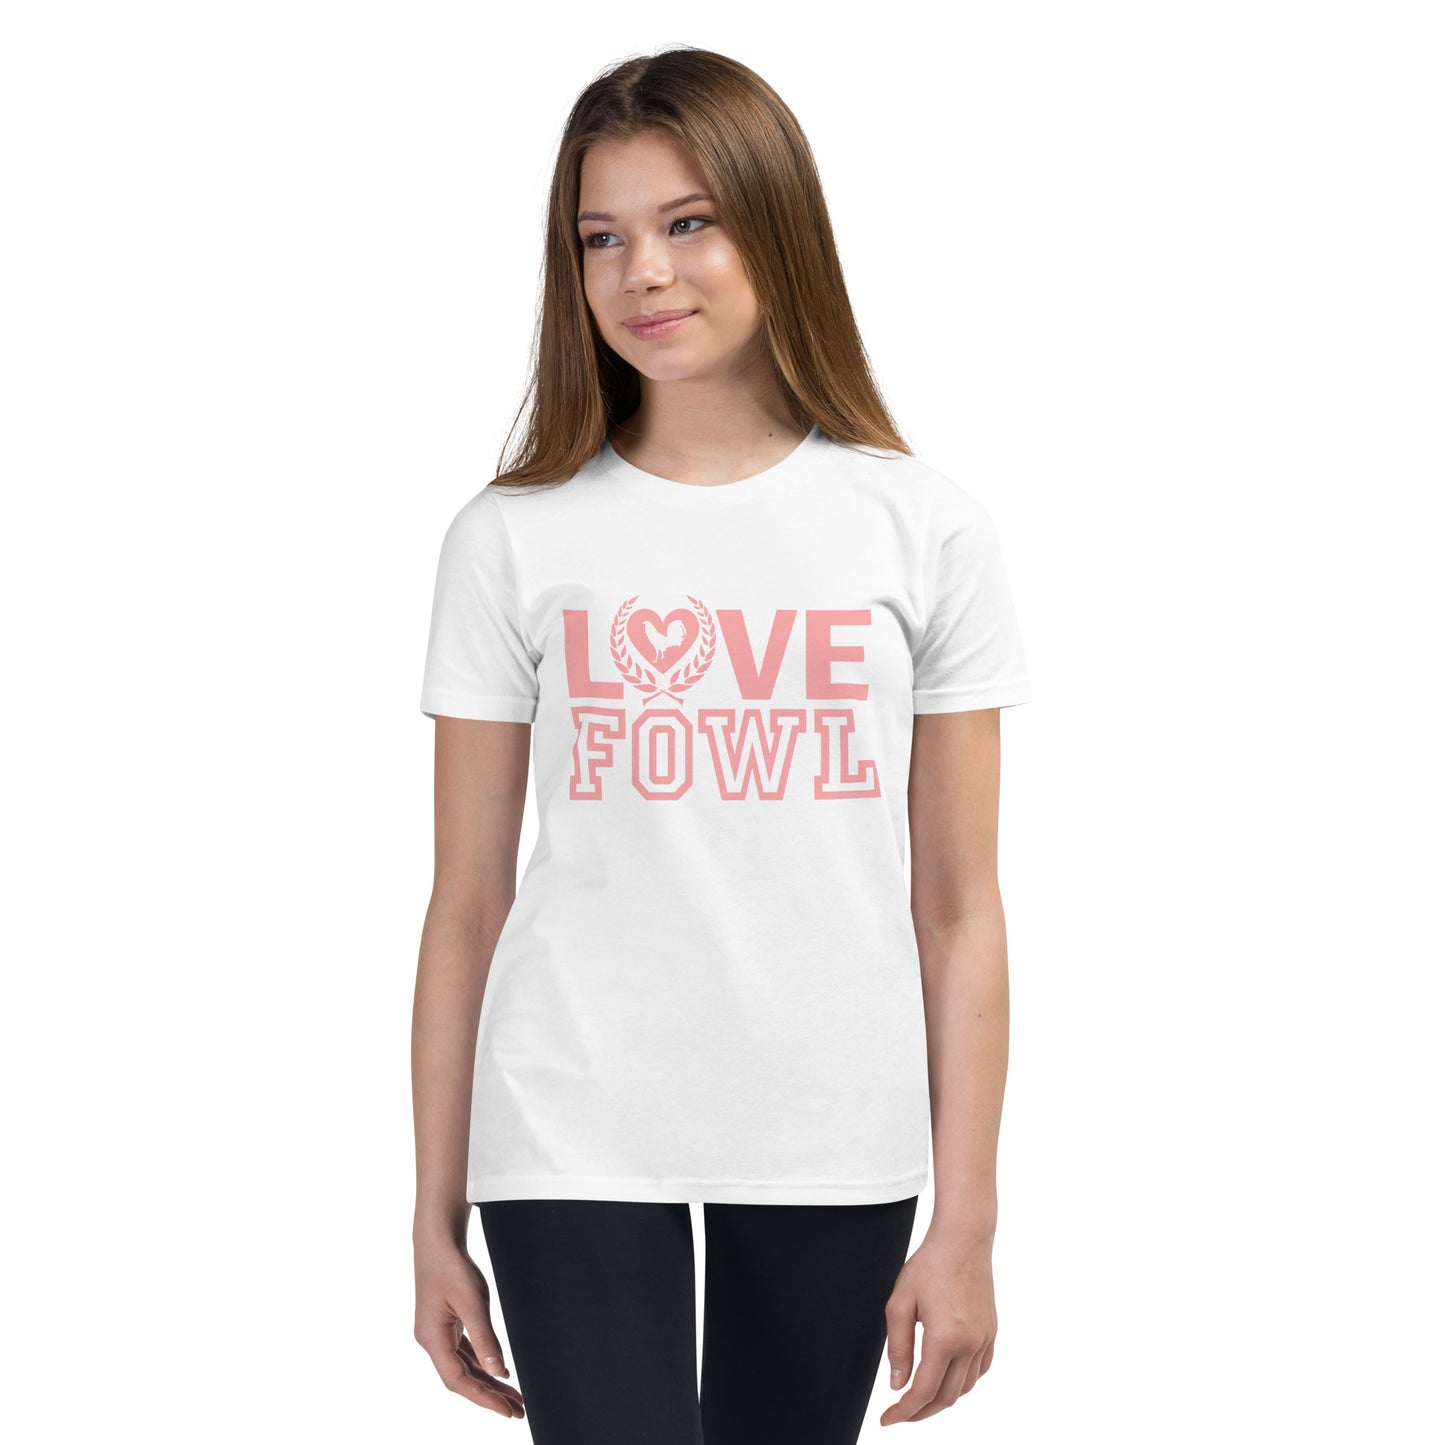 Youth PEACH CRESENT VS LOVE FOWL Gamefowl Rooster T-Shirt